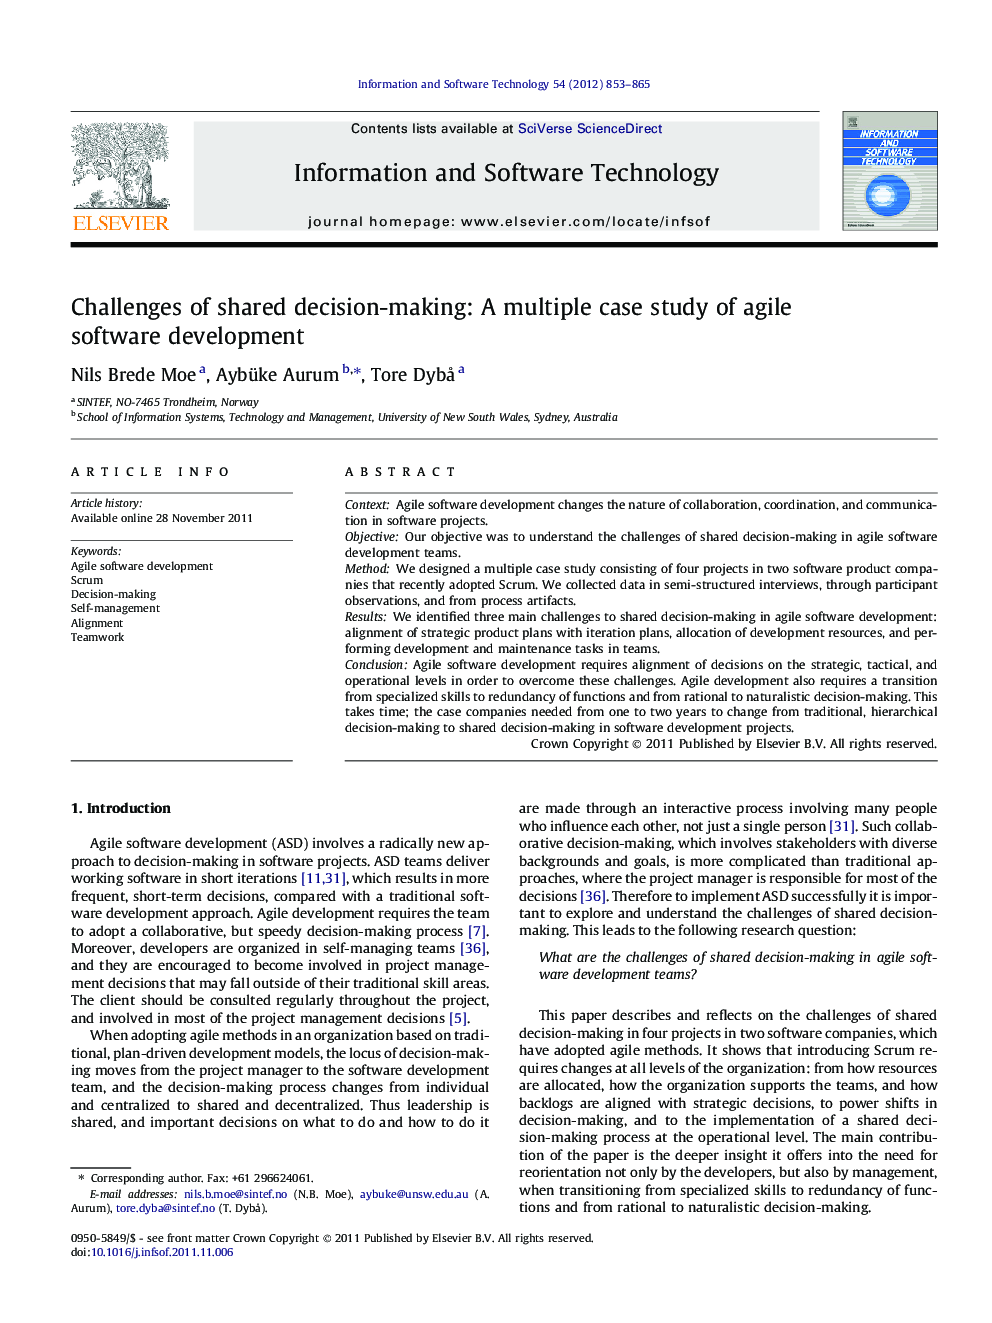 Challenges of shared decision-making: A multiple case study of agile software development